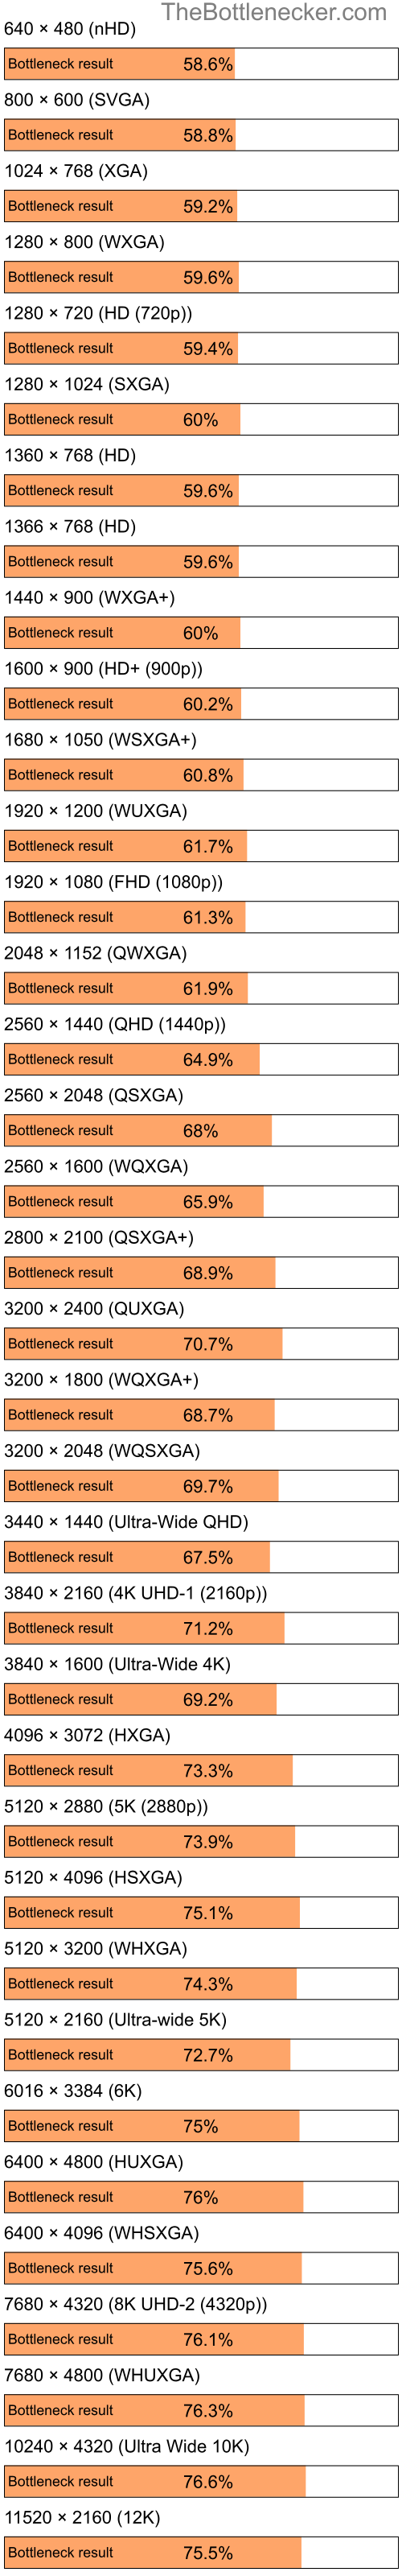 Bottleneck results by resolution for Intel Atom N270 and AMD Radeon HD 2350 in Processor Intense Tasks